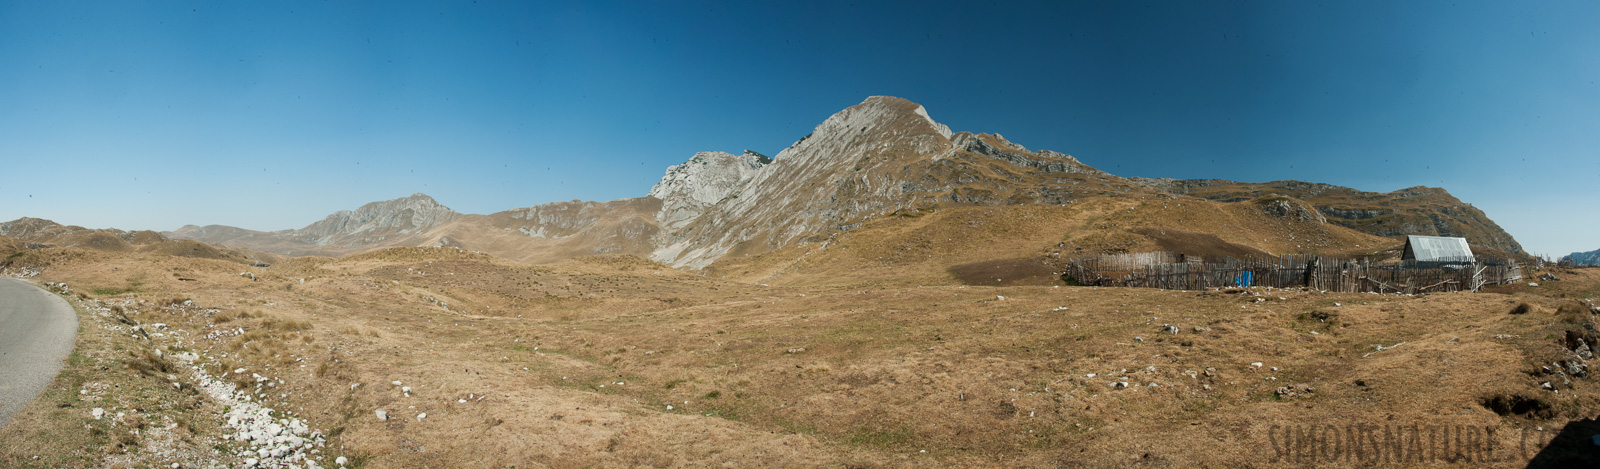 Montenegro - In the region of the Durmitor massif [28 mm, 1/100 sec at f / 20, ISO 400]